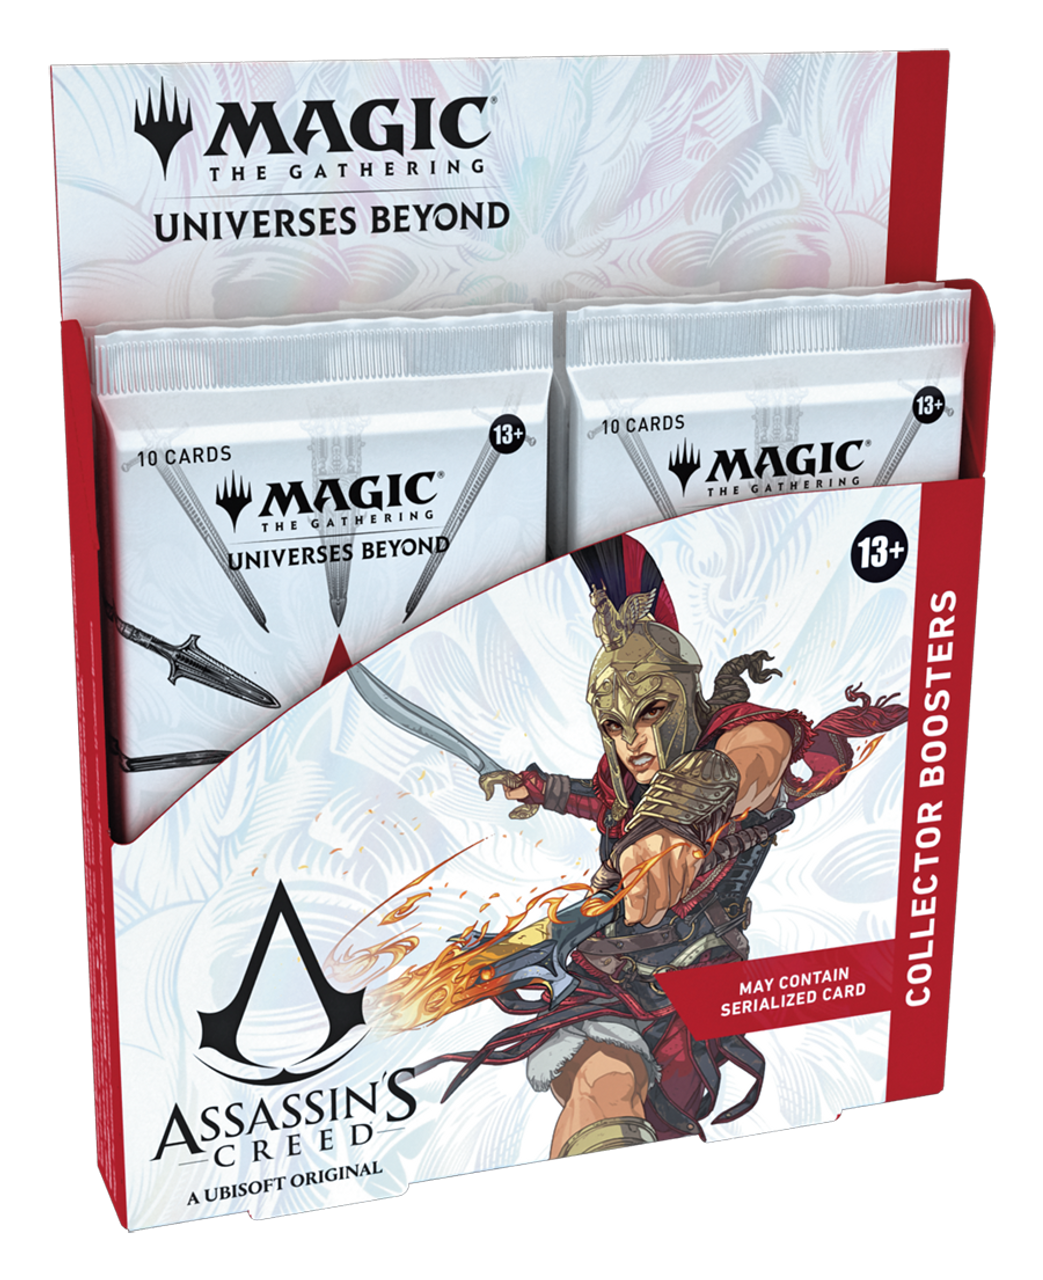 Magic: The Gathering Assassin's Creed Collector Booster Box